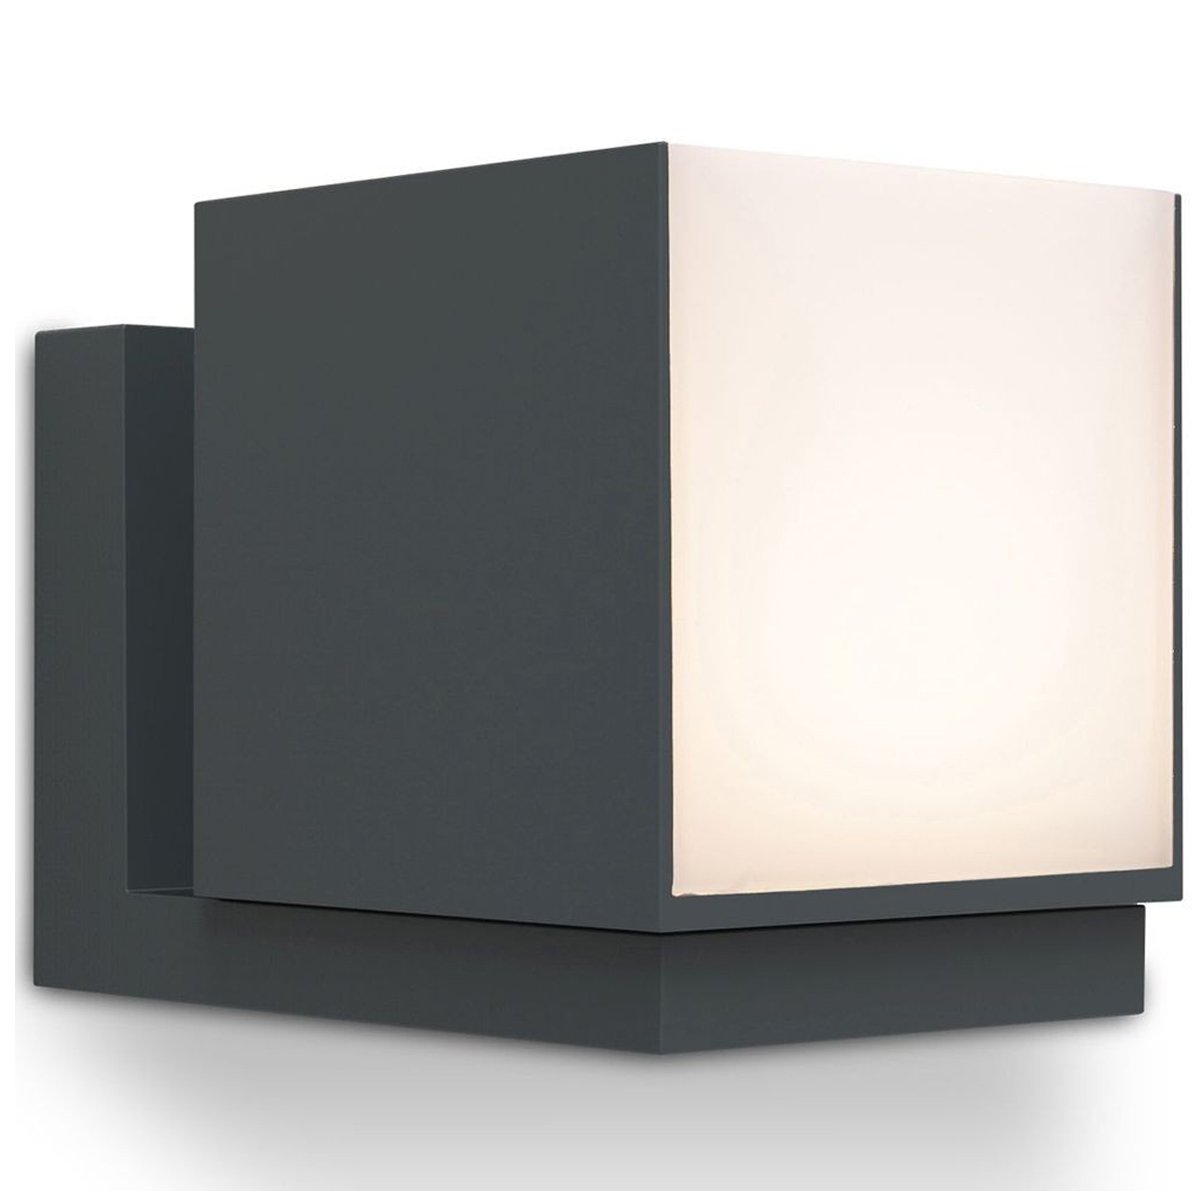 Come browse our Morgan dark grey outdoor wall light by CGC Interiors. This cube light can be mounted onto a wall on your home’s exterior space, creating an atmospheric lighting system for your garden, front door, or even on your driveway to provide an extra security solution. 